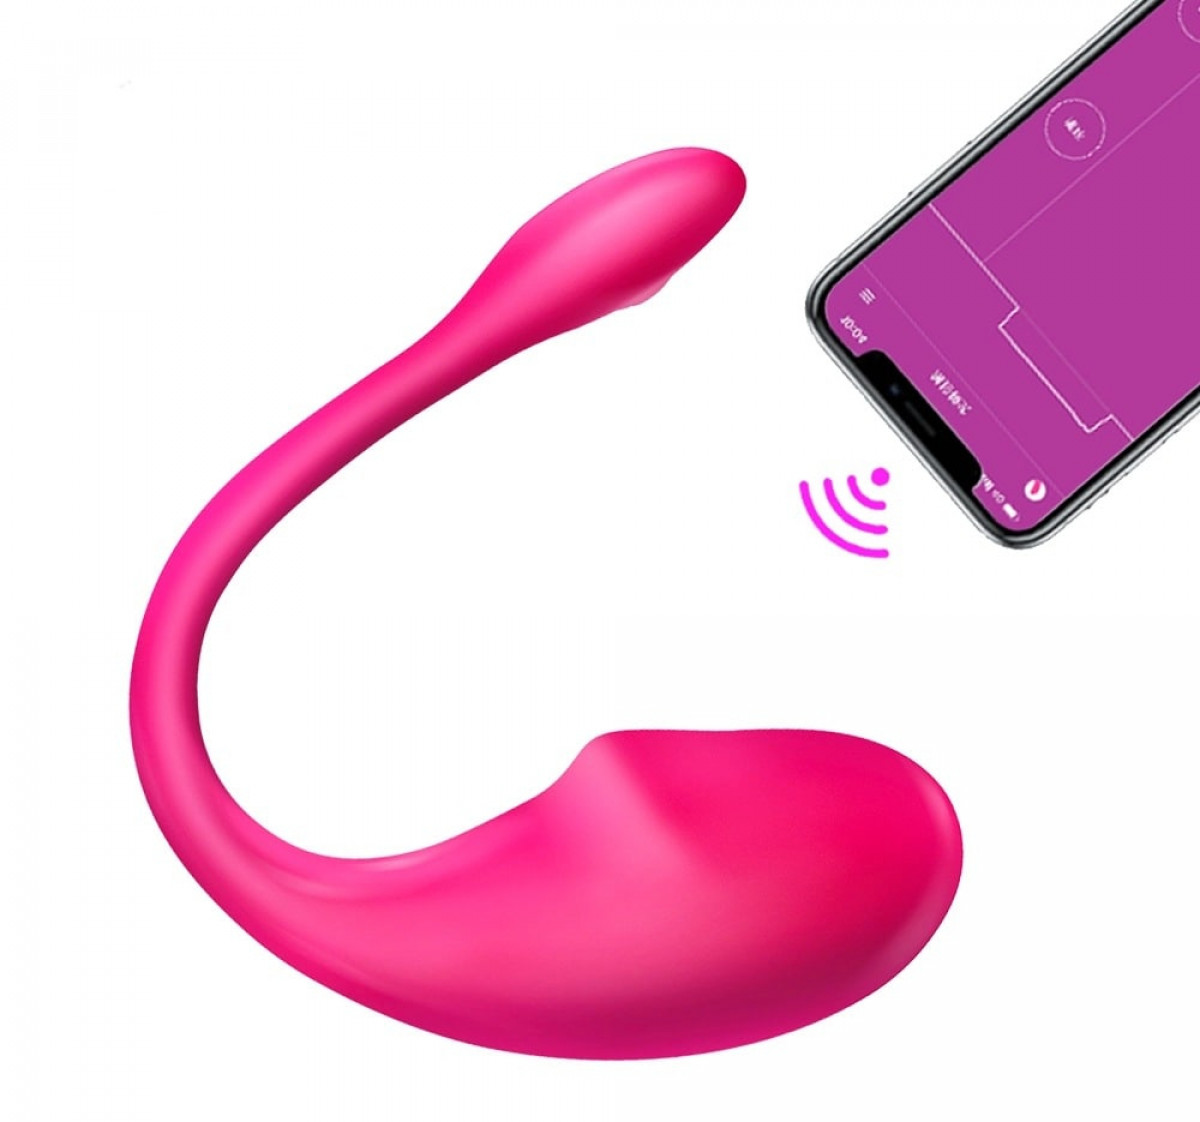 Lush 3 vibrator connected to phone